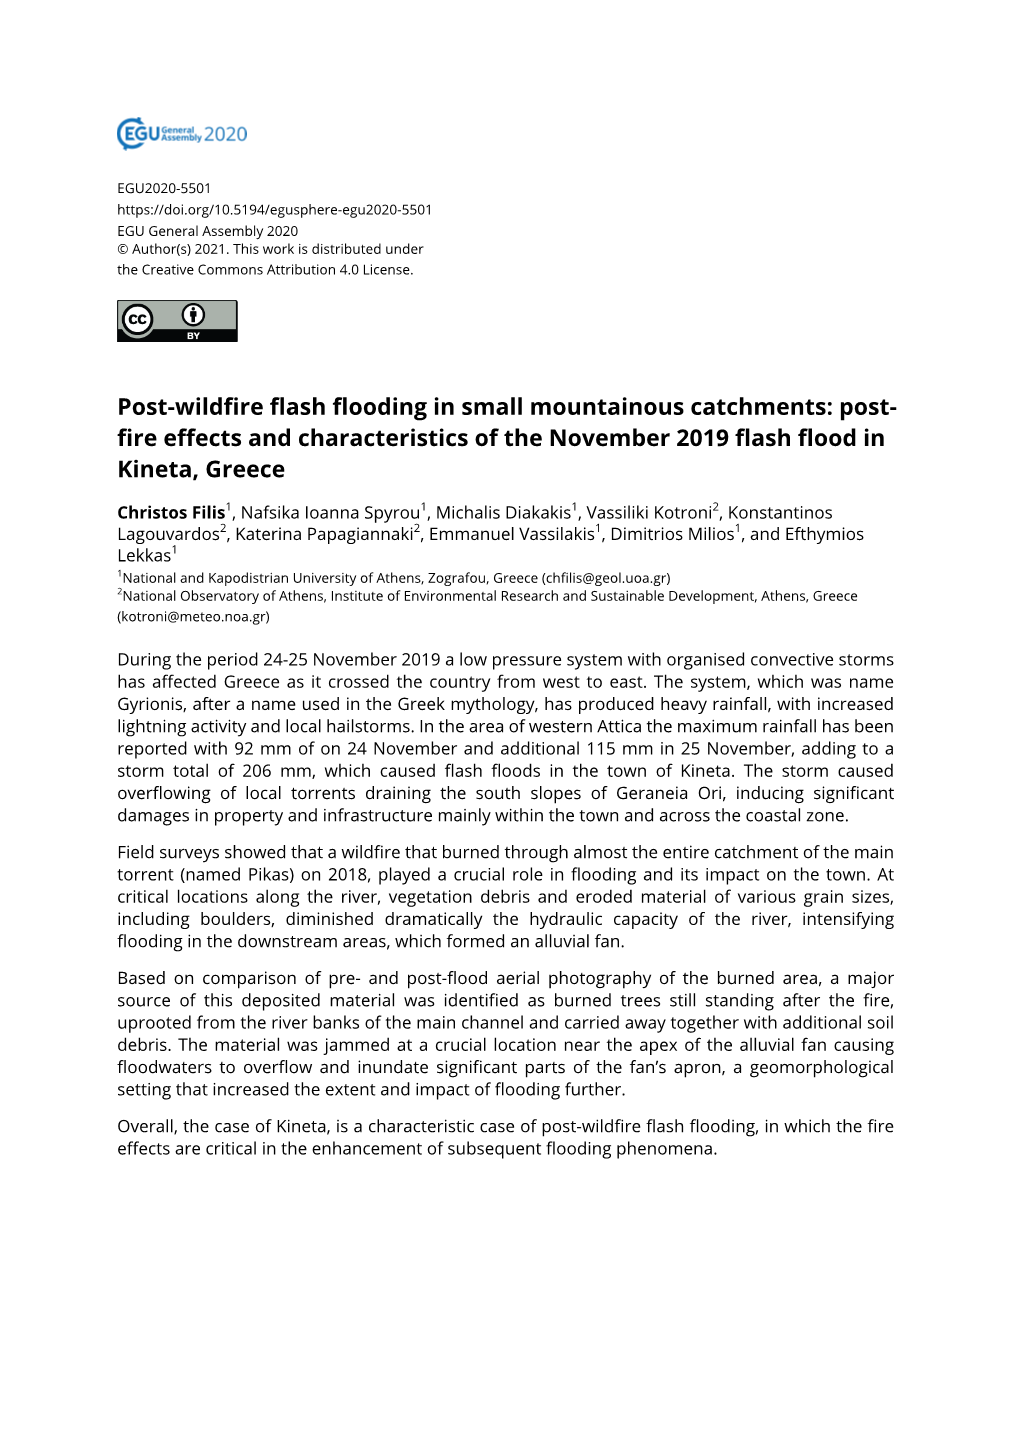 Post-Wildfire Flash Flooding in Small Mountainous Catchments: Post- Fire Effects and Characteristics of the November 2019 Flash Flood in Kineta, Greece